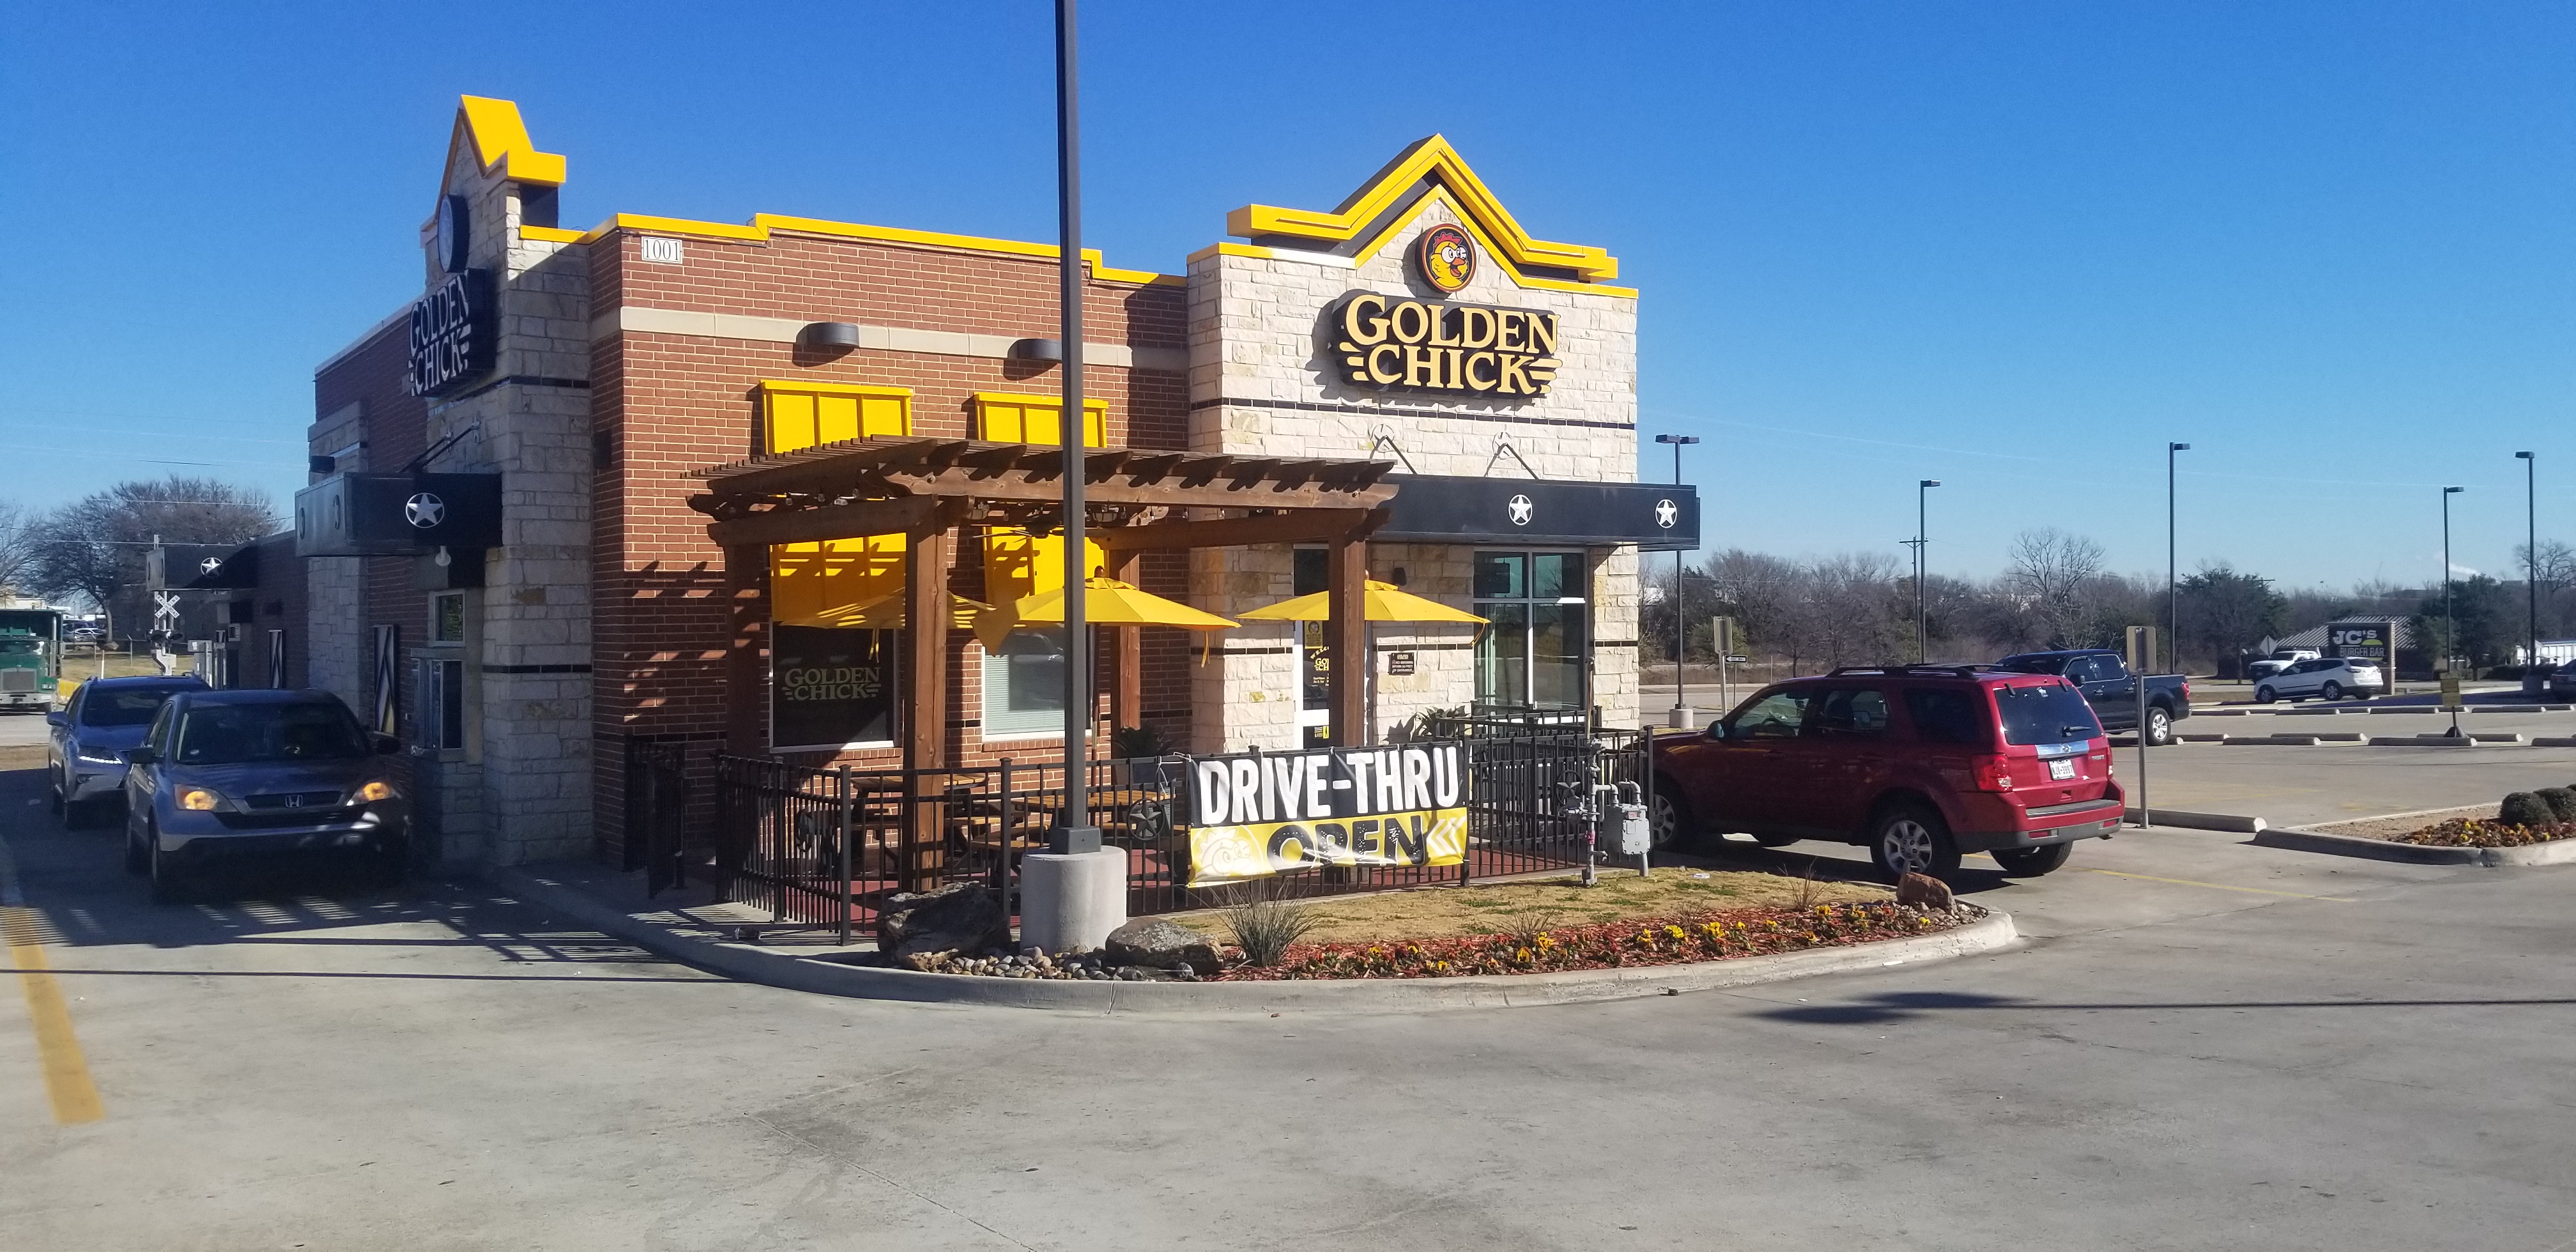 Golden Chick storefront.  Your local Golden Chick fast food restaurant in Mesquite, Texas